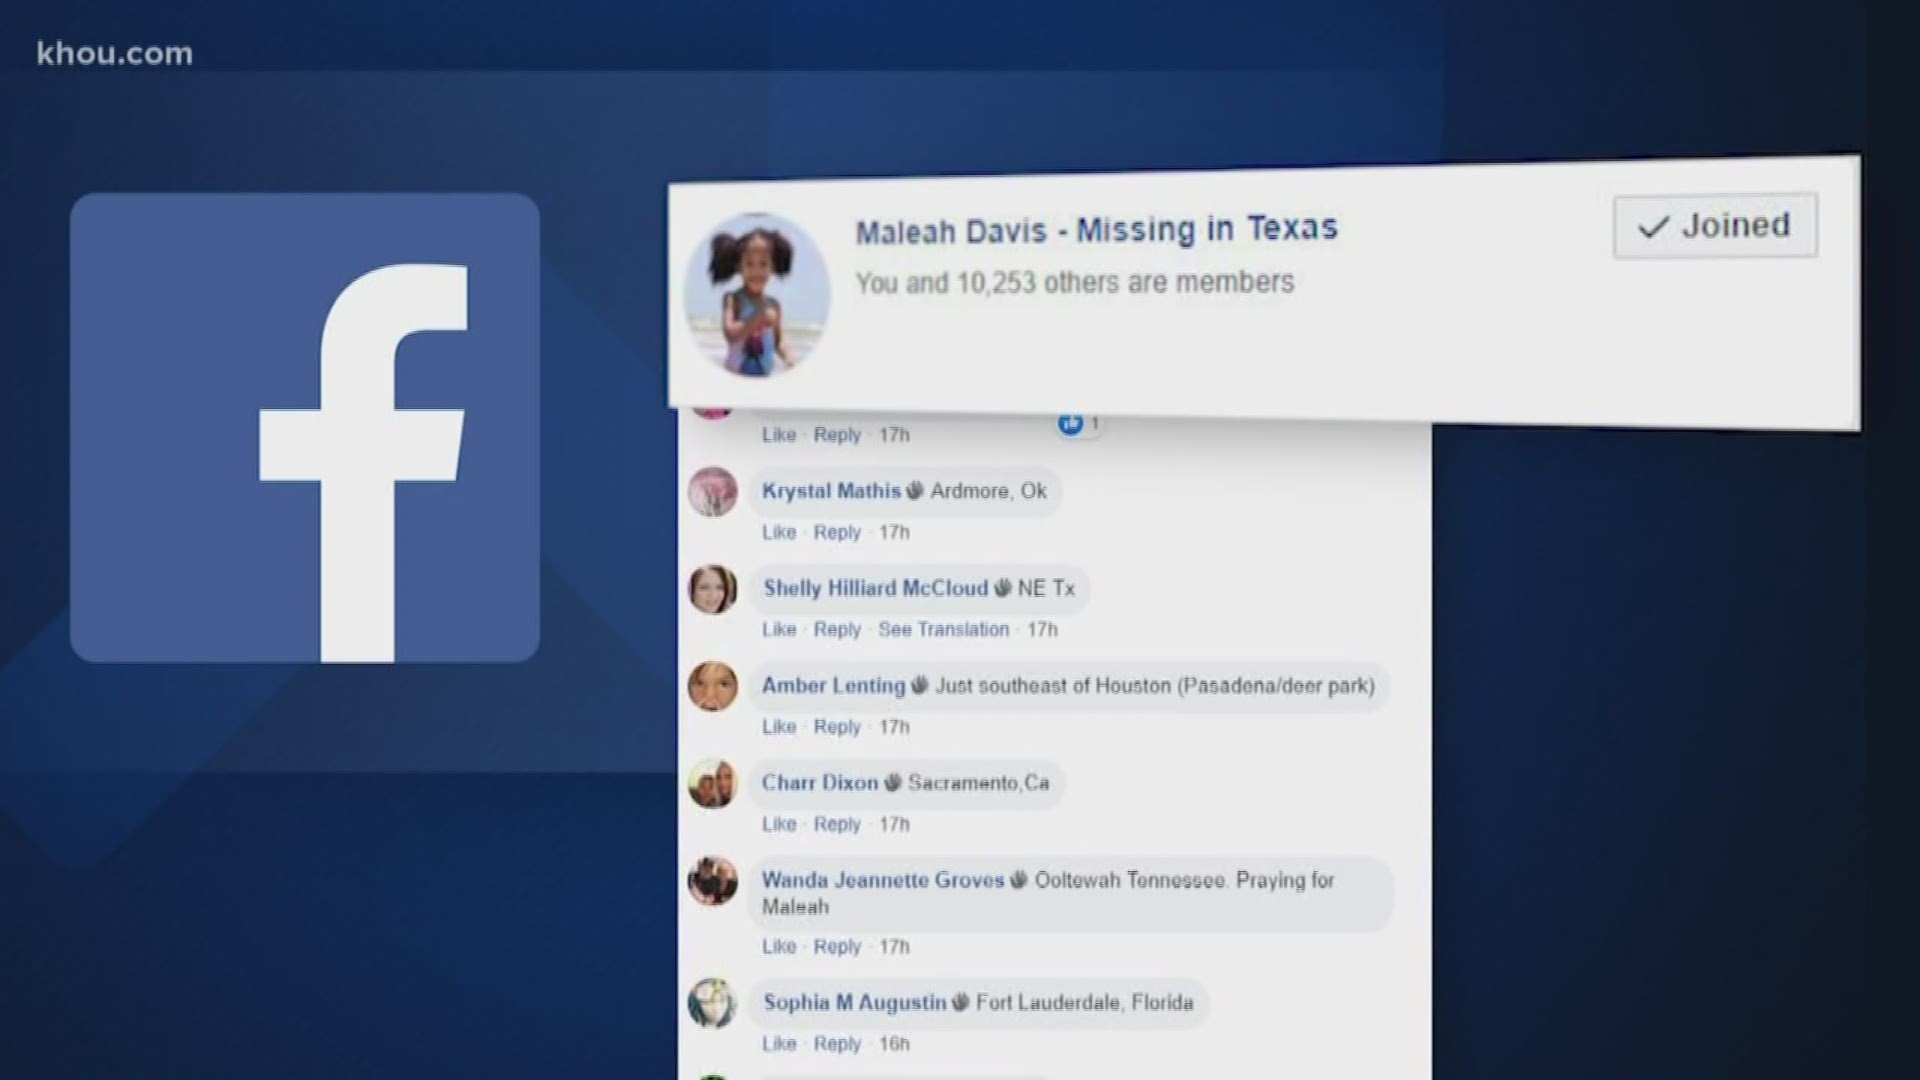 People throughout the world are joining Facebook groups dedicated to helping find 4-year-old Houston girl Maleah Davis.